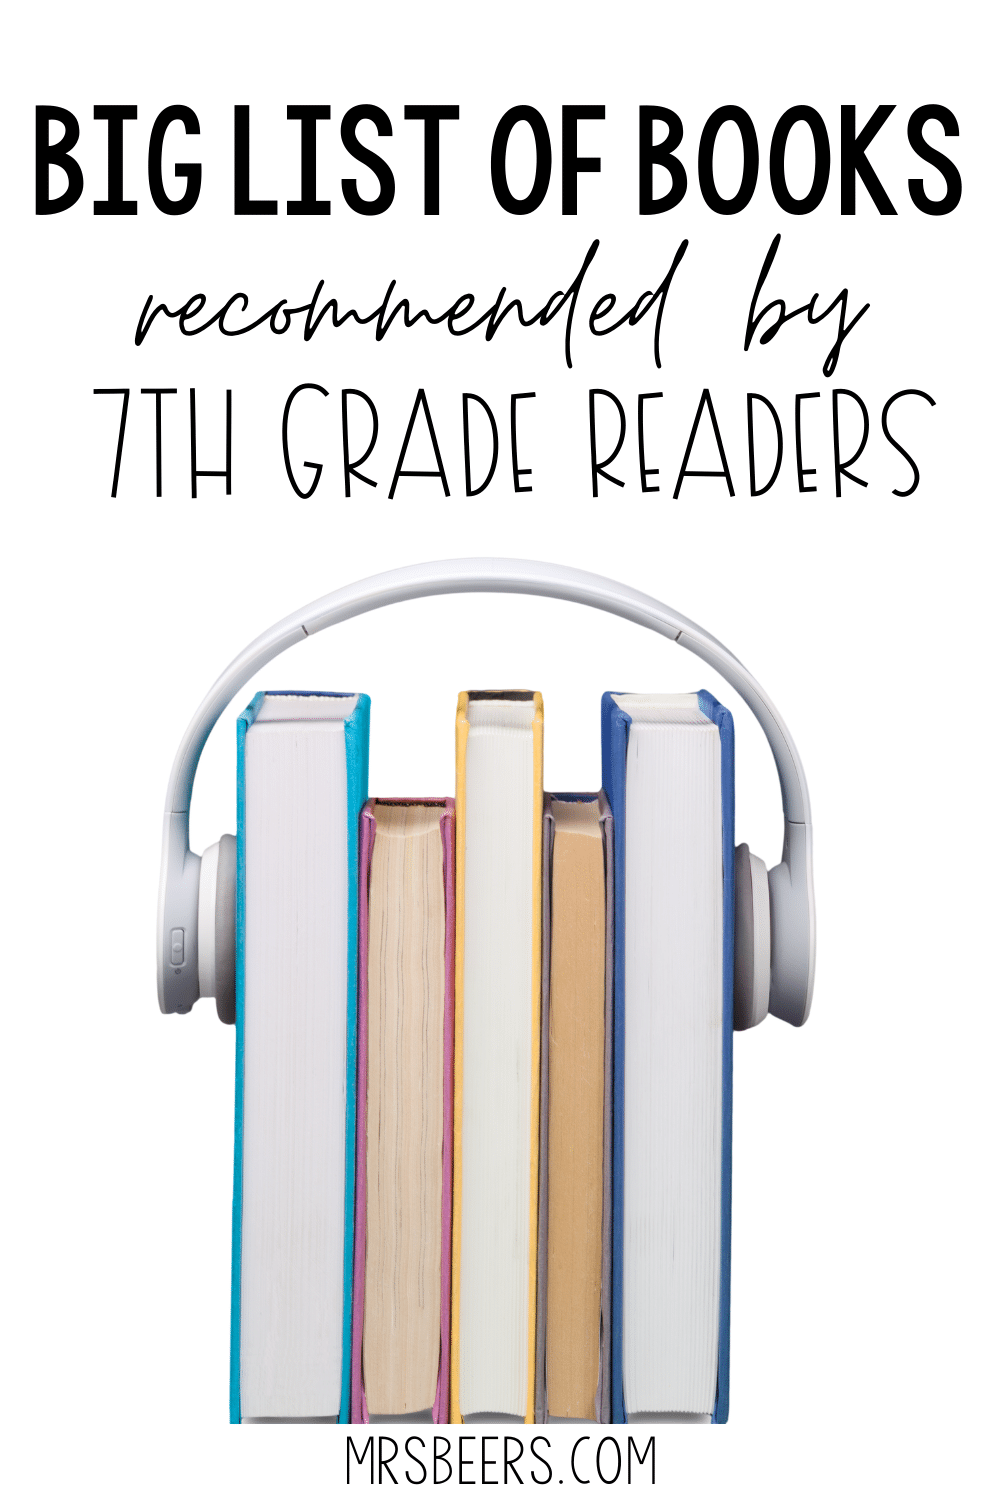 Awesome Books for 7th Graders